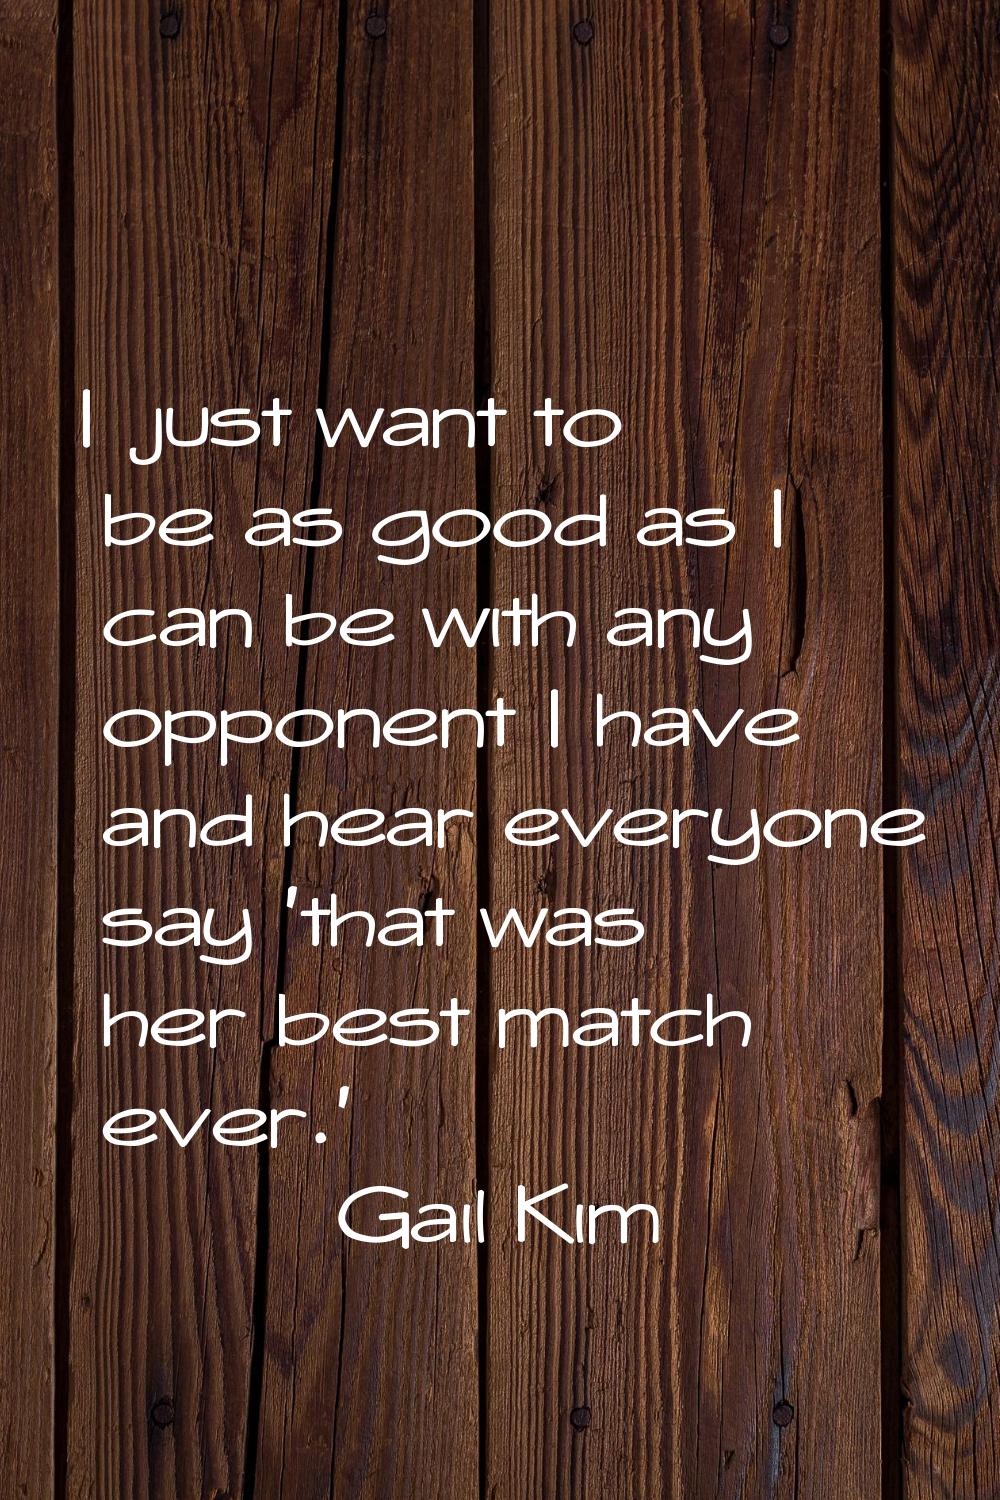 I just want to be as good as I can be with any opponent I have and hear everyone say 'that was her 